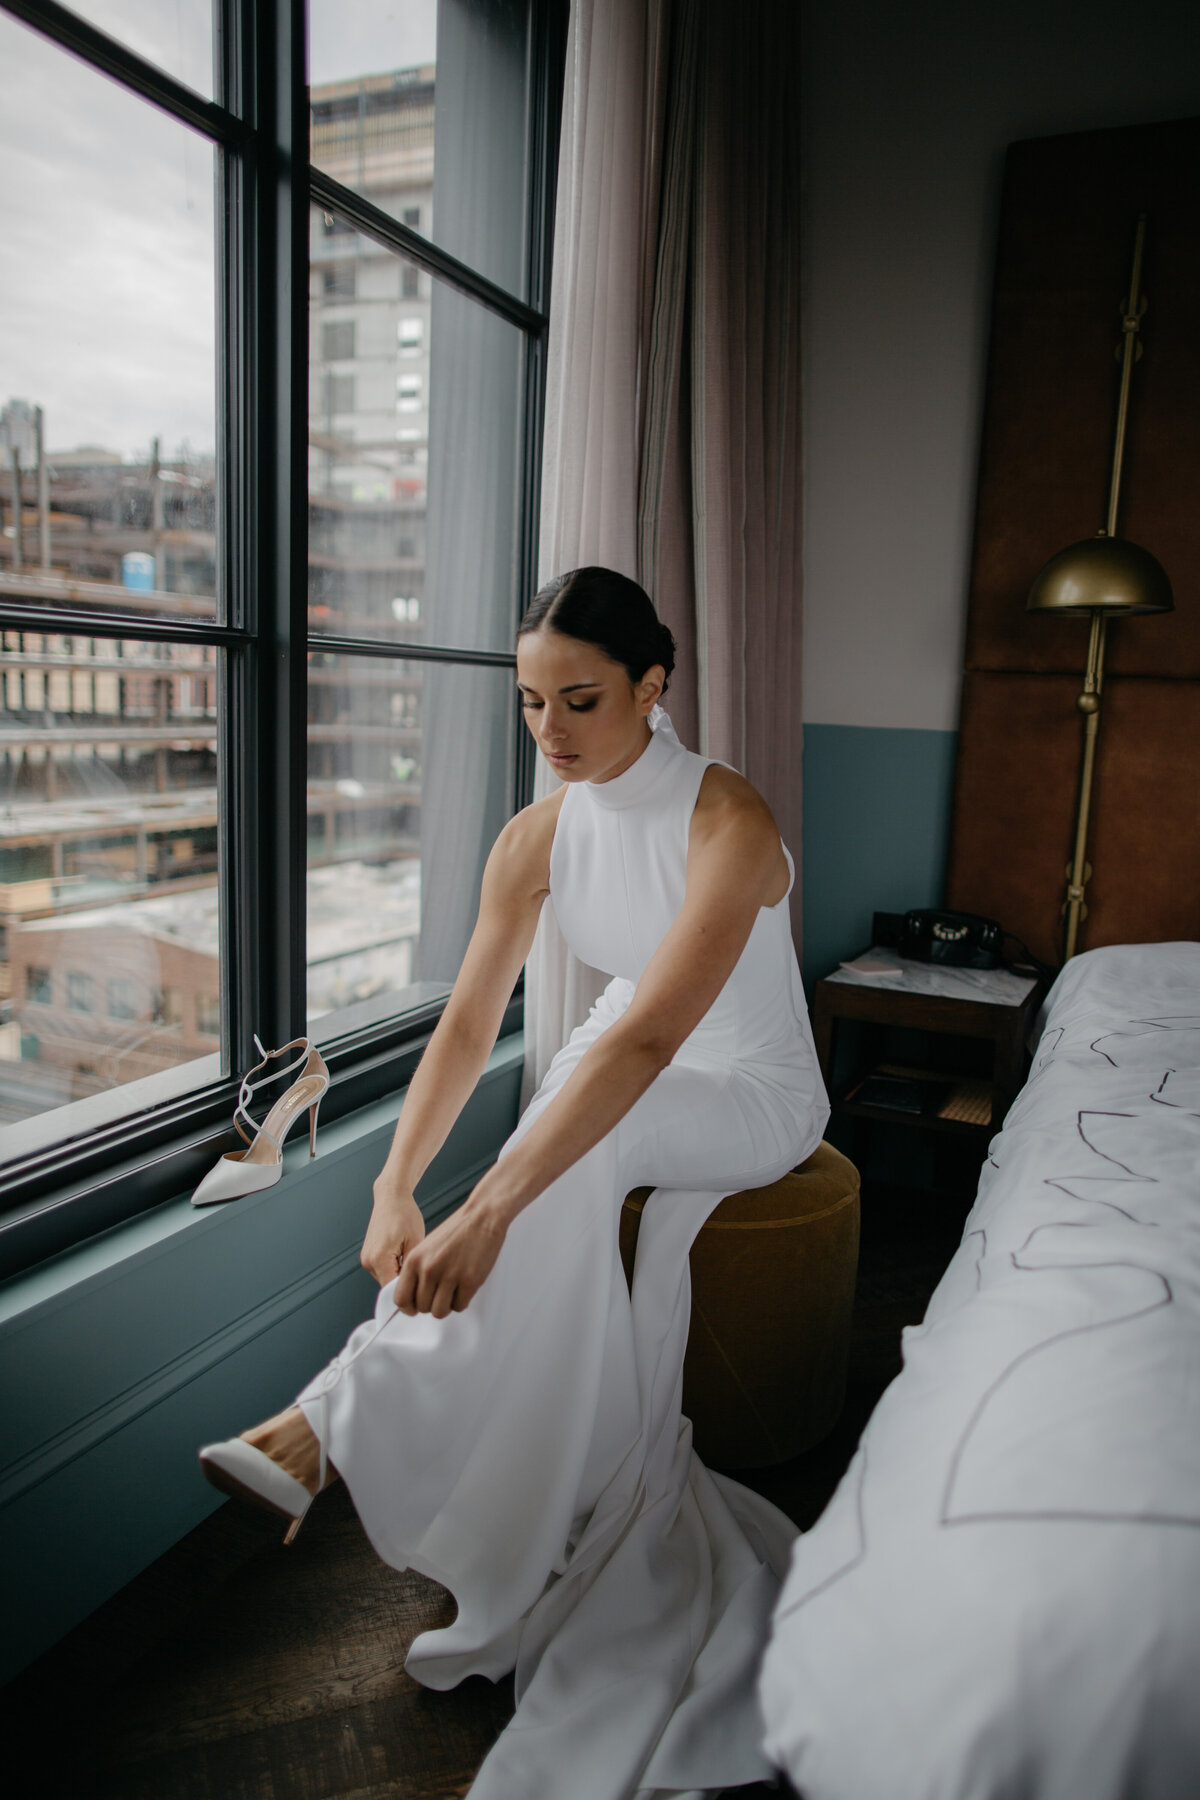 Bride sitting by window in downtown Chicago hotel room putting heels on